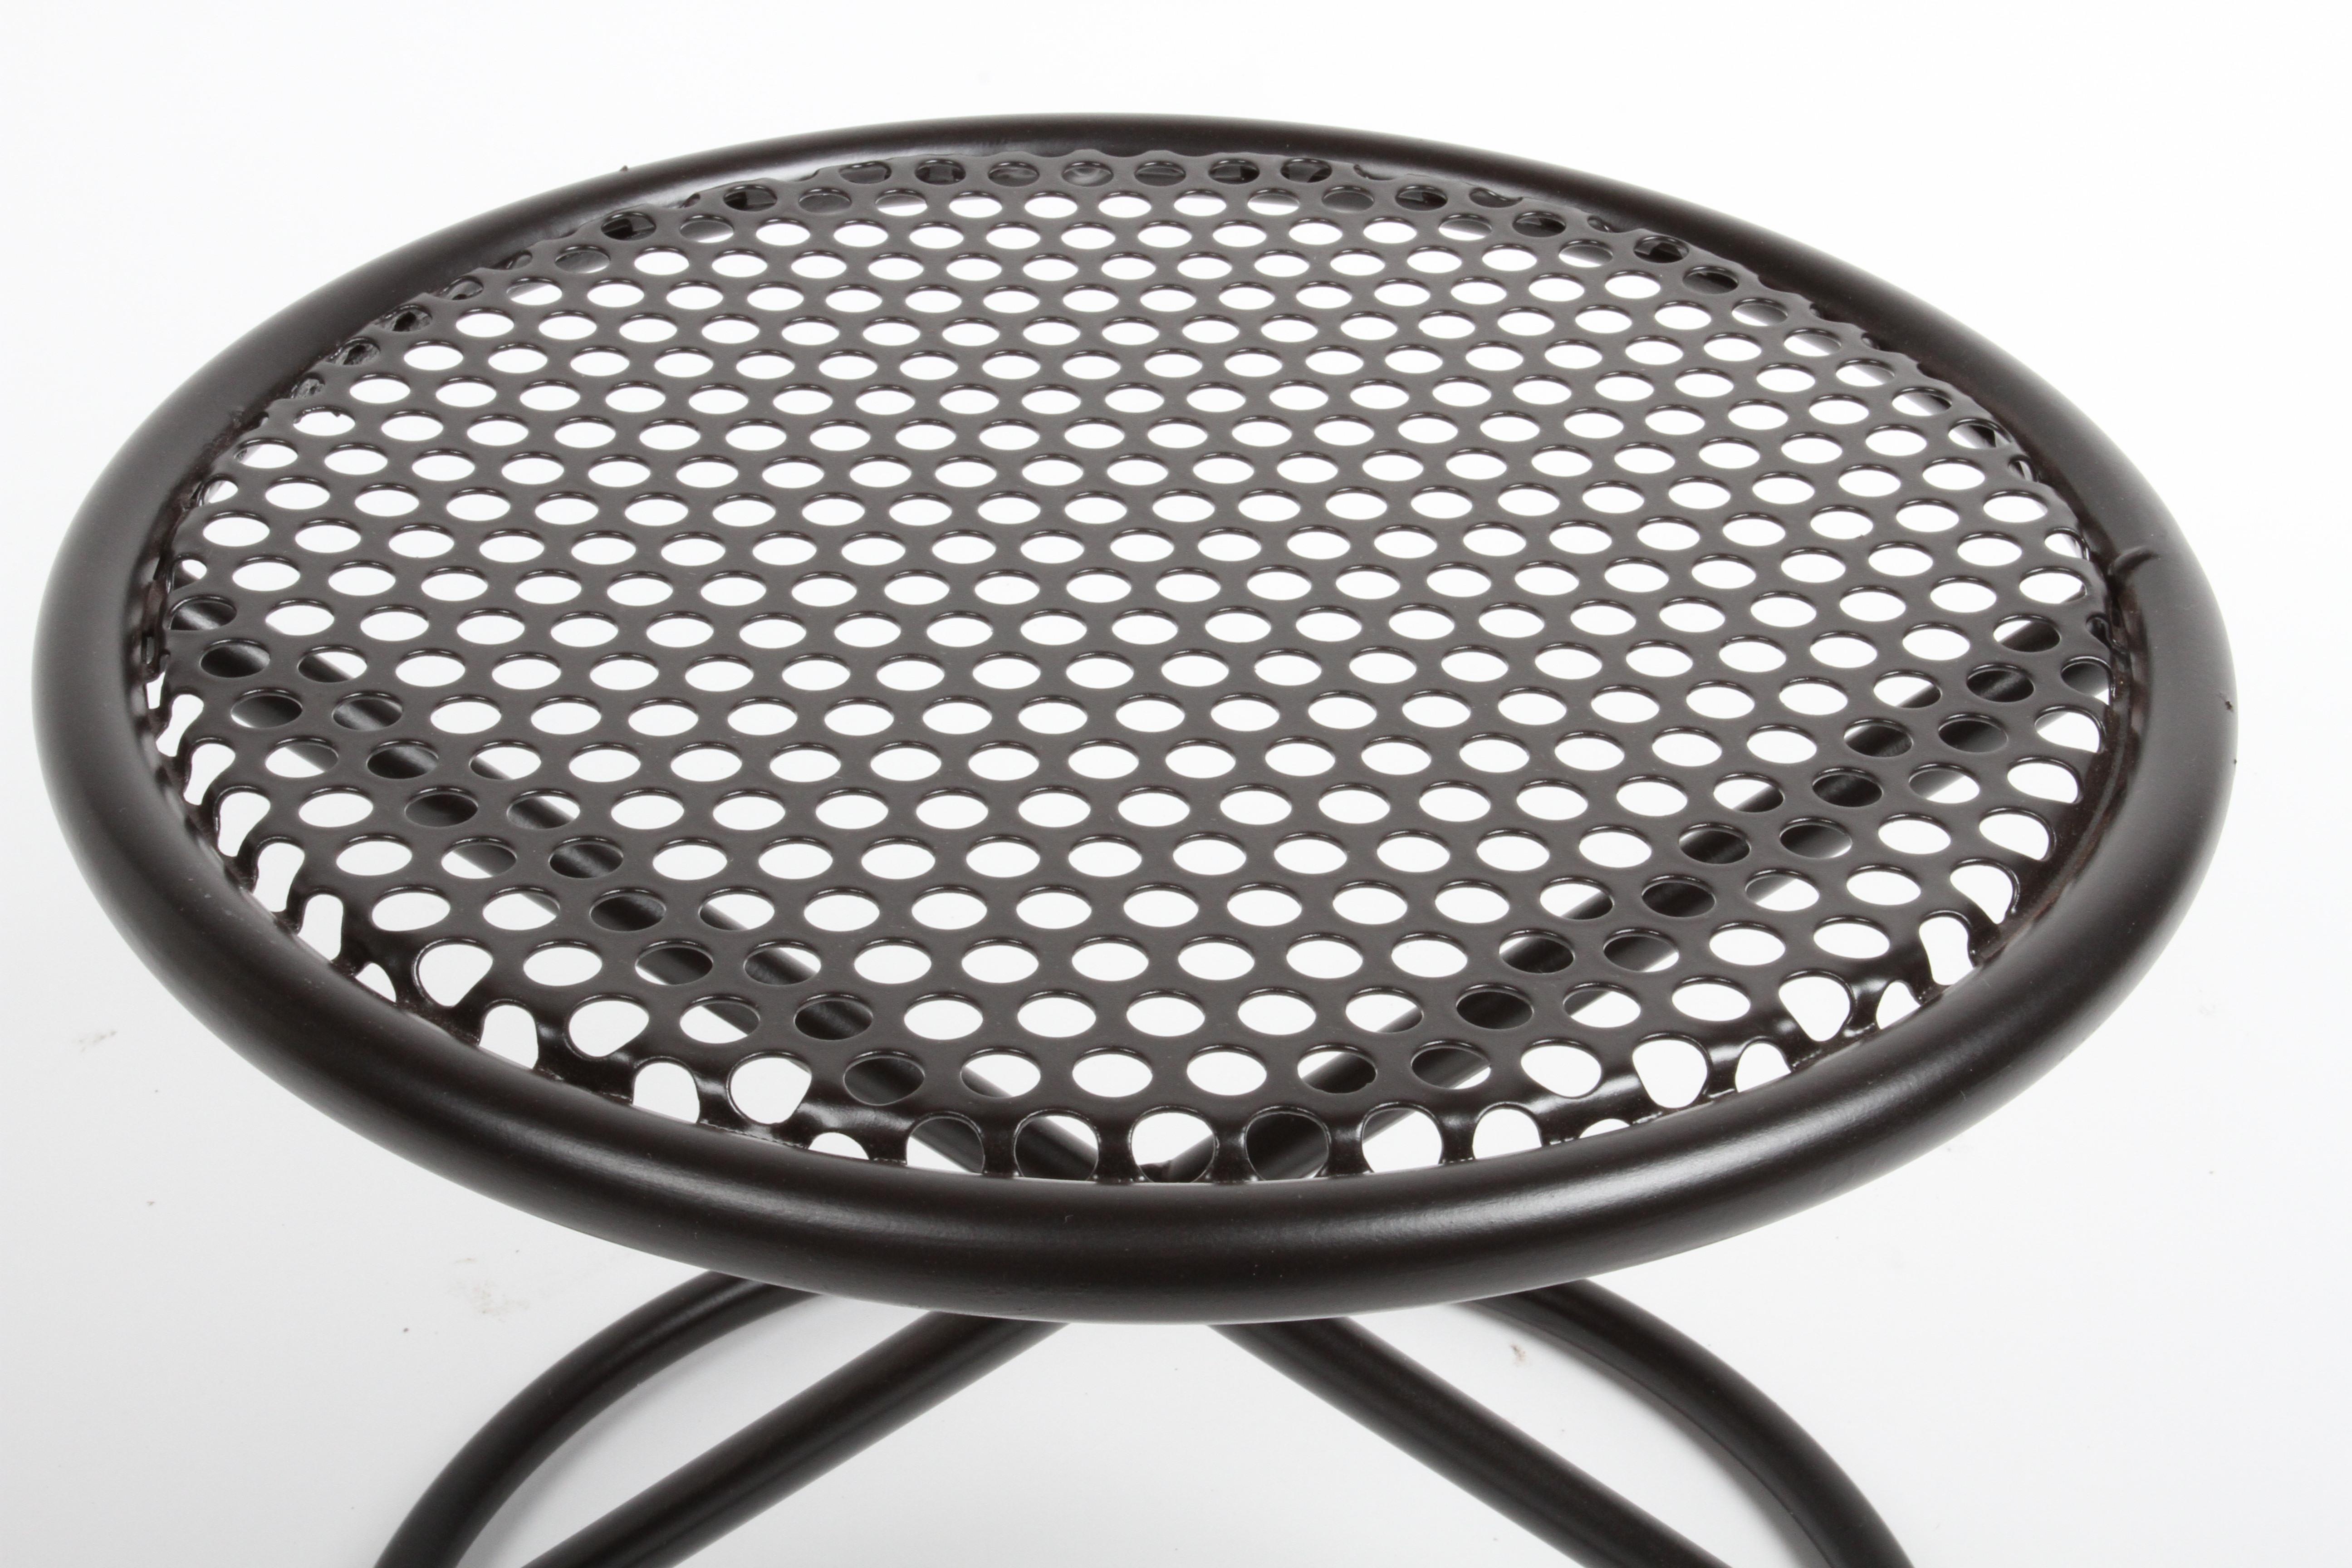 Mid-20th Century Mathieu Matégot Style Round Patio Side Tables with Perforated Tops & X Supports For Sale